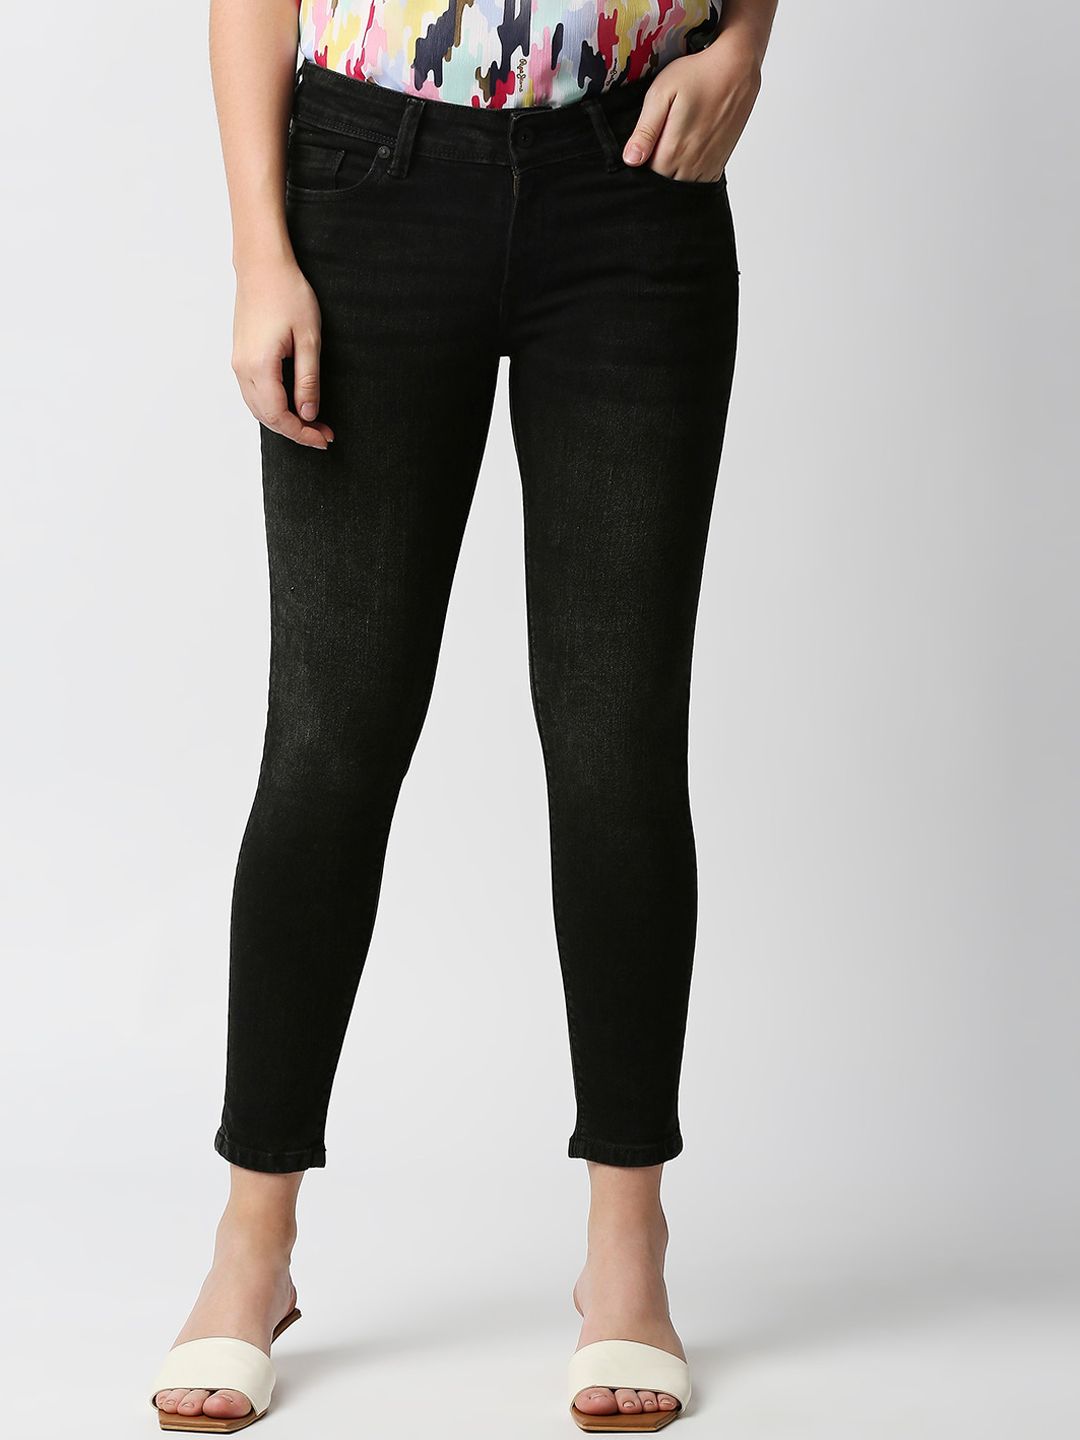 Pepe Jeans Women Black Skinny Fit Cotton Jeans Price in India